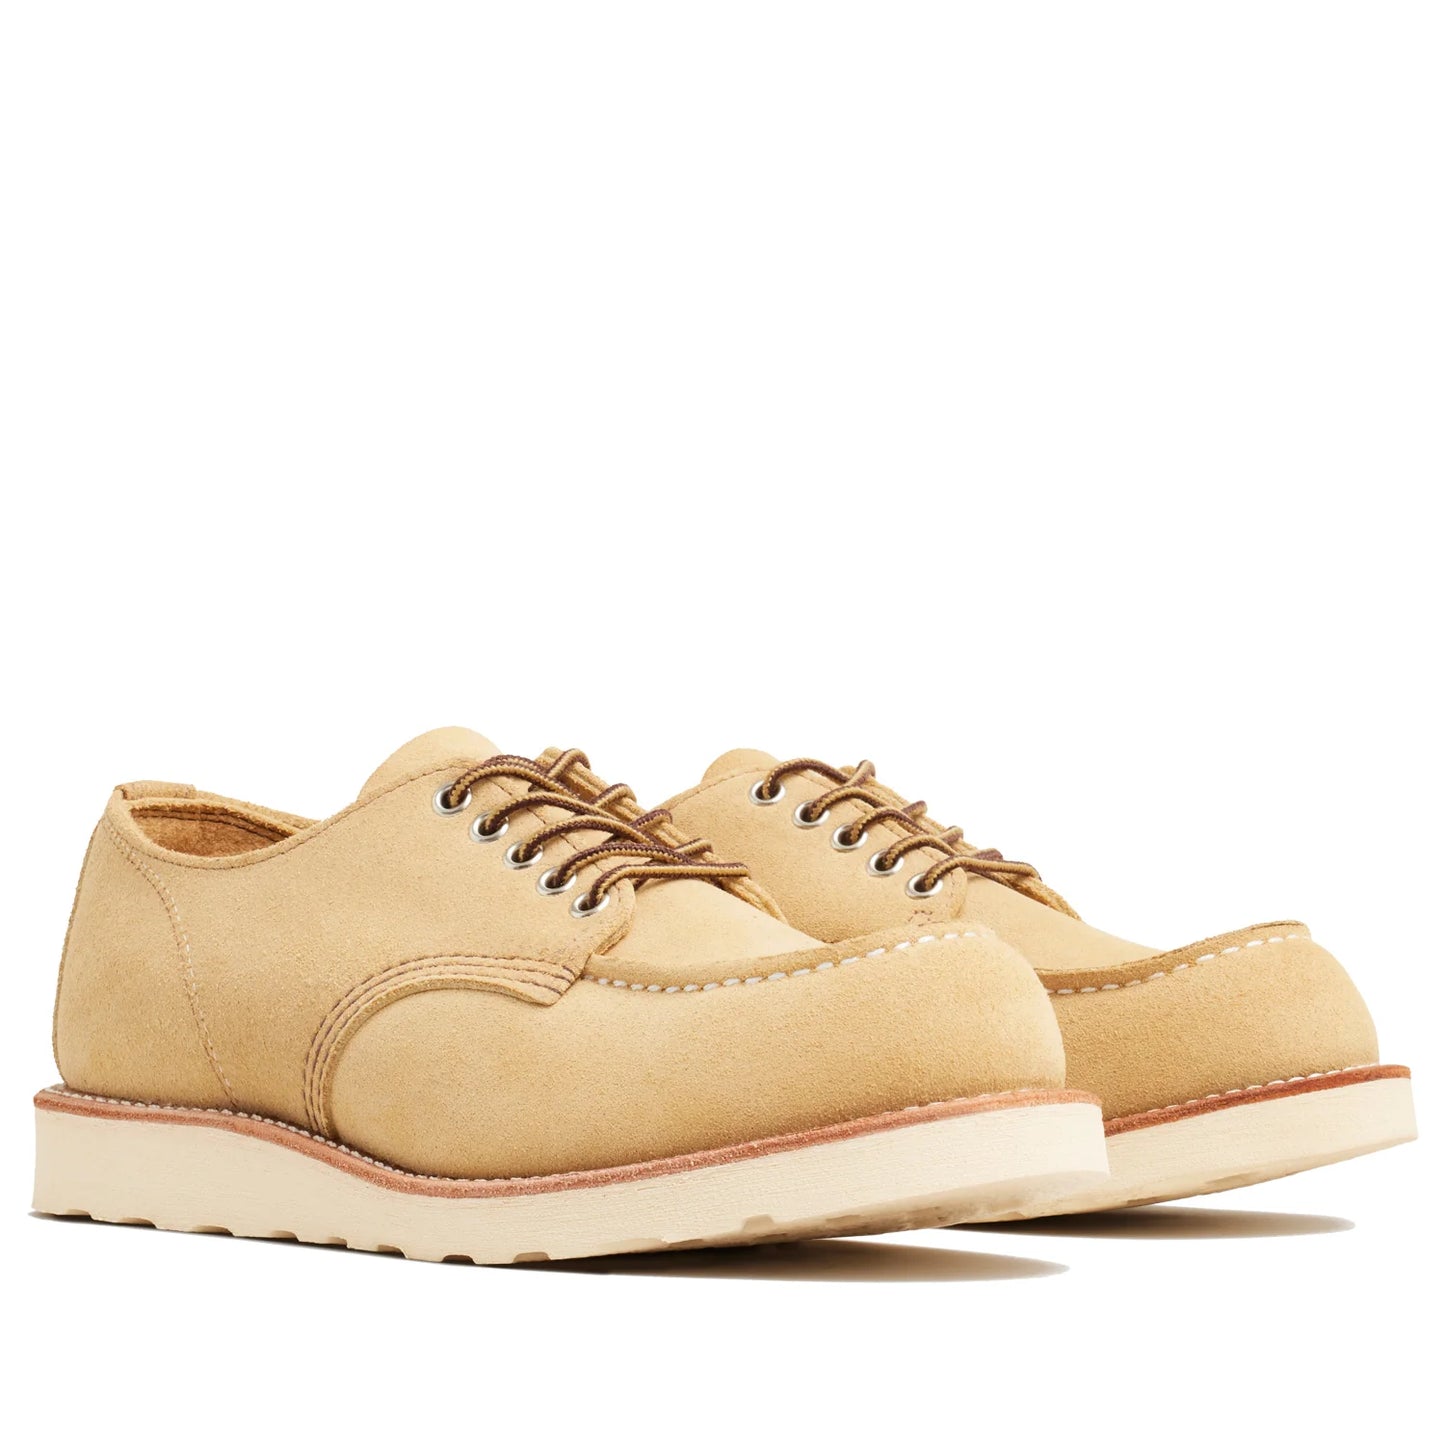 Red Wing Moc Oxford Hawthorne 8079